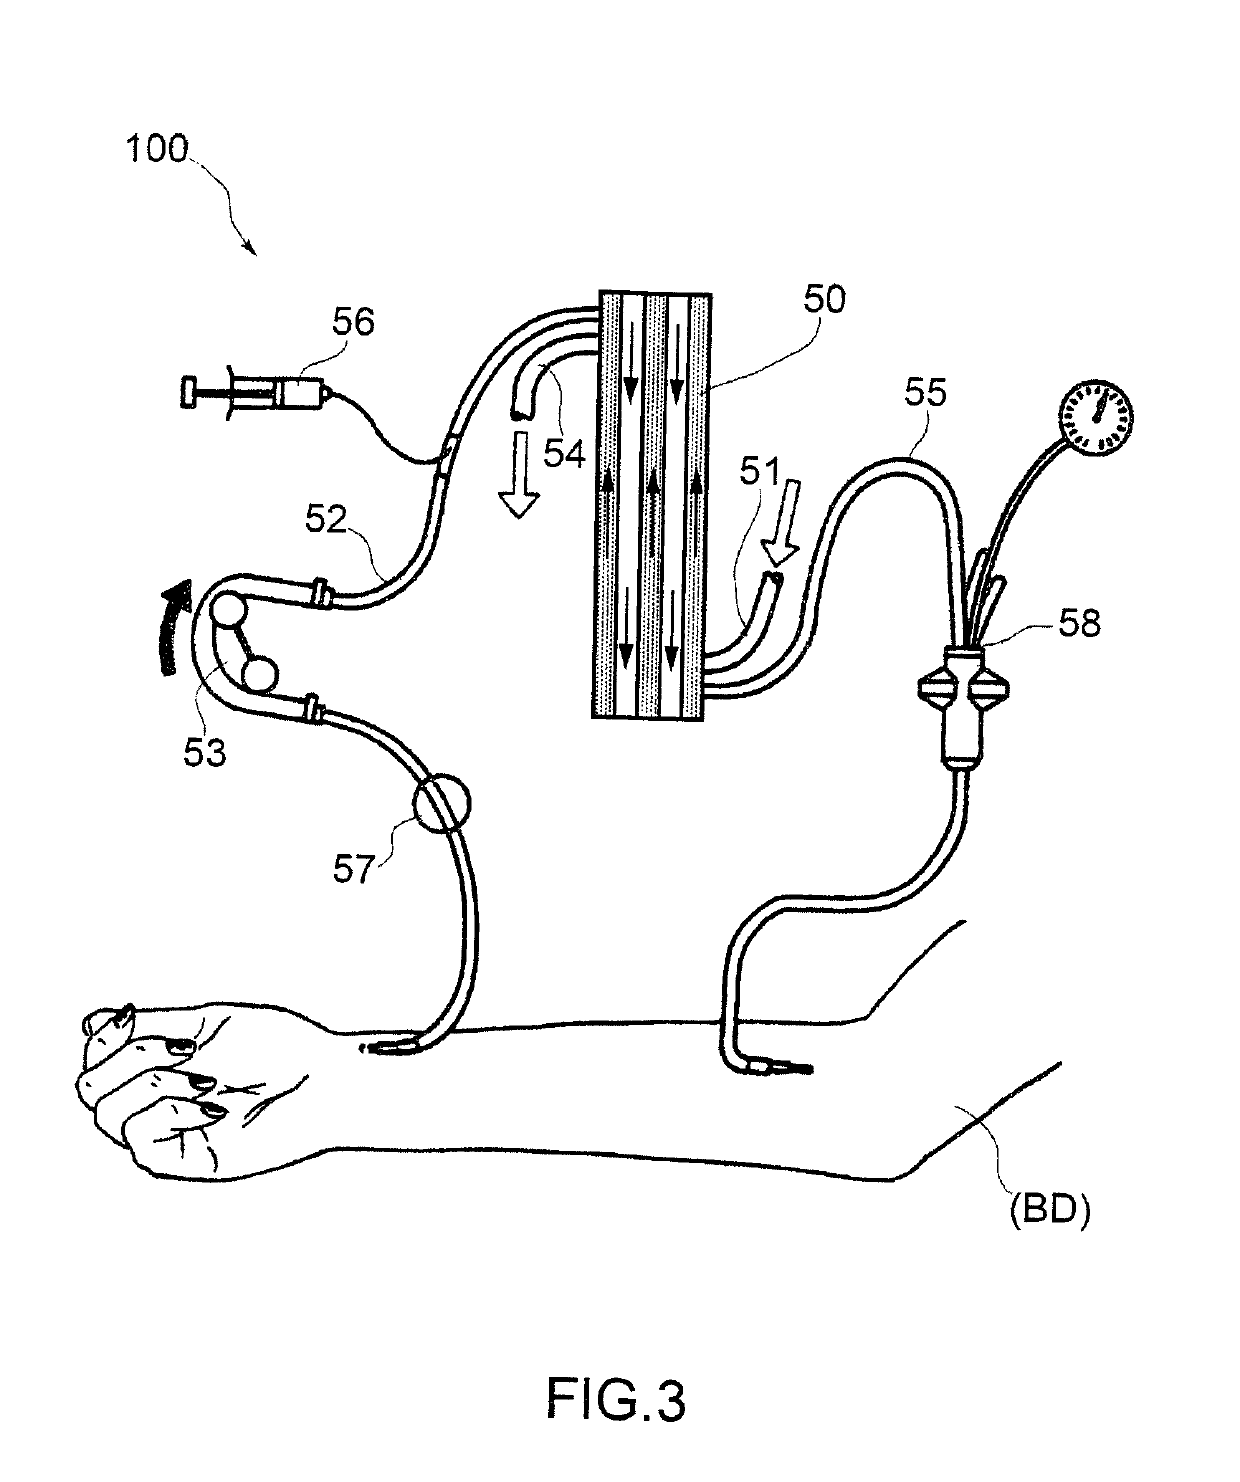 Differential flow-meter for measuring the weight loss in haemodialysis treatments